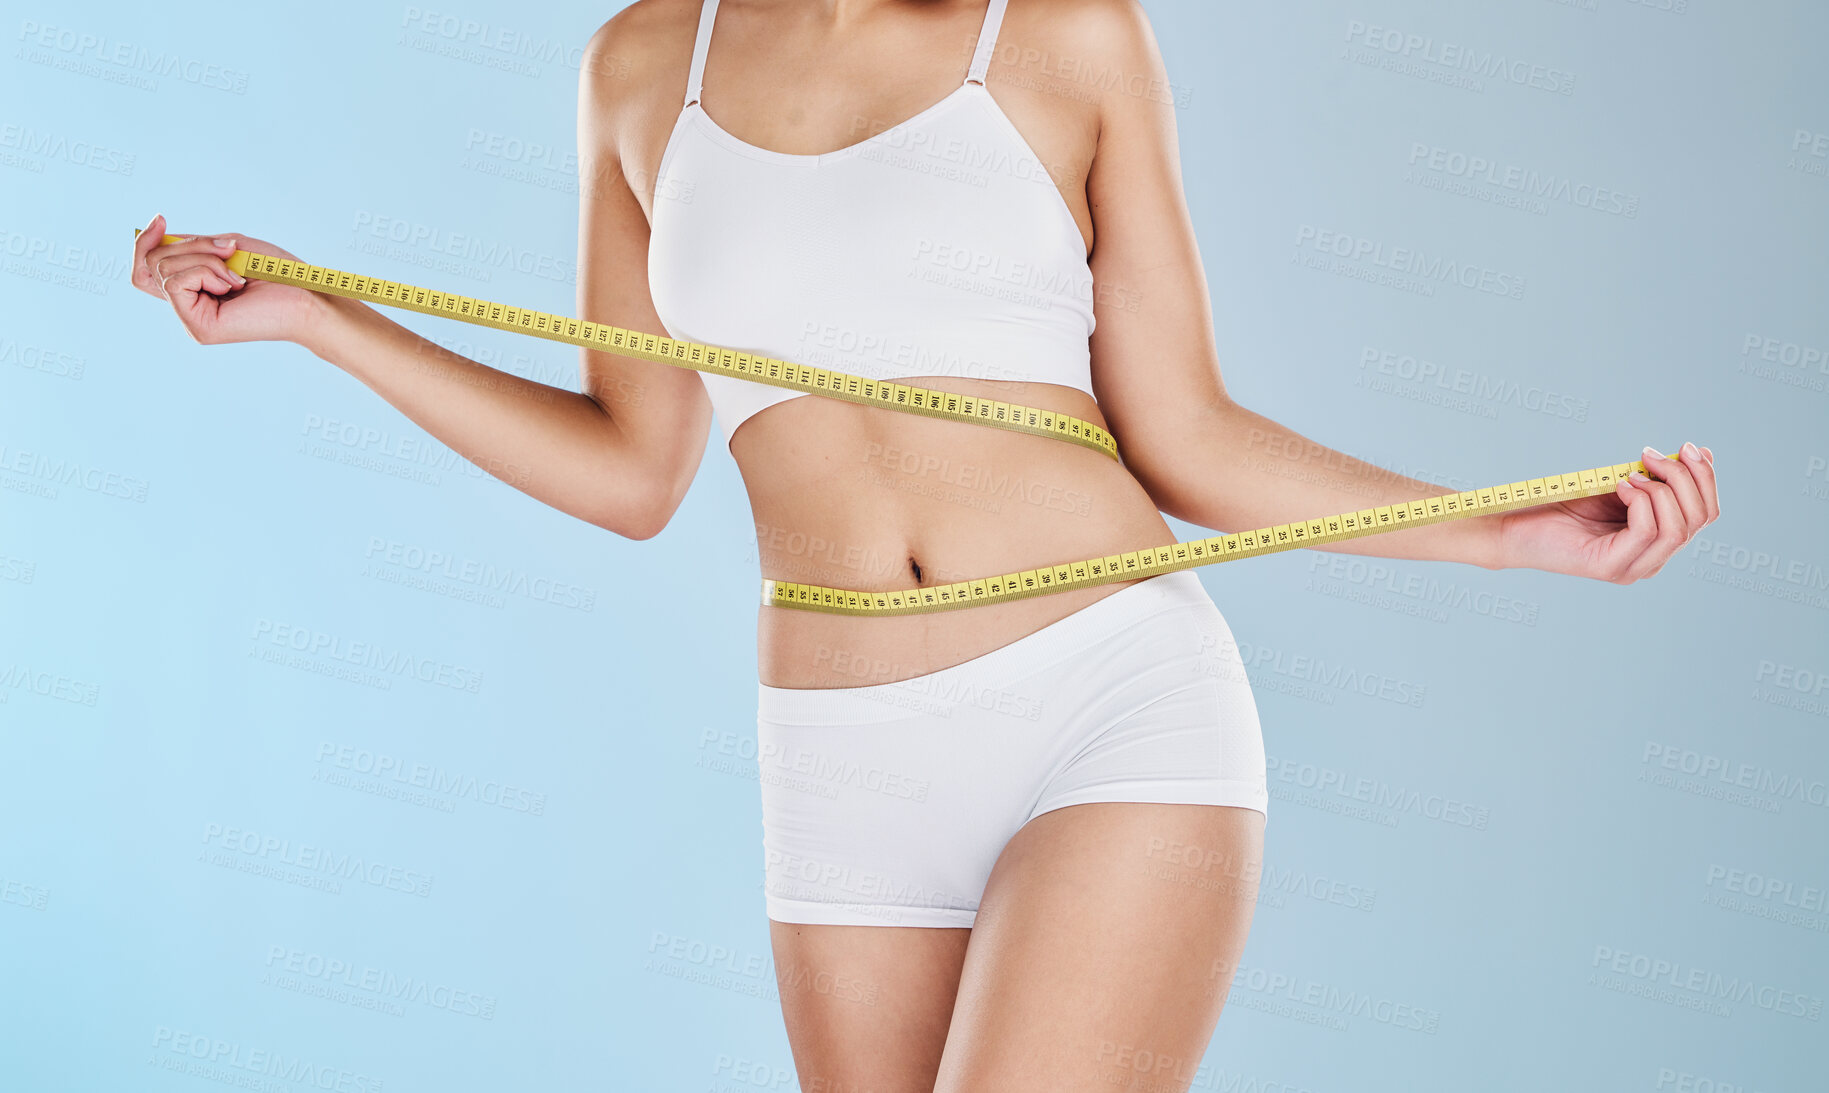 Buy stock photo Health, diet and body of woman with tape measure to track progress, check fitness results and measure waist, stomach or abdomen. Weight loss motivation, wellness lifestyle and slimming self care girl